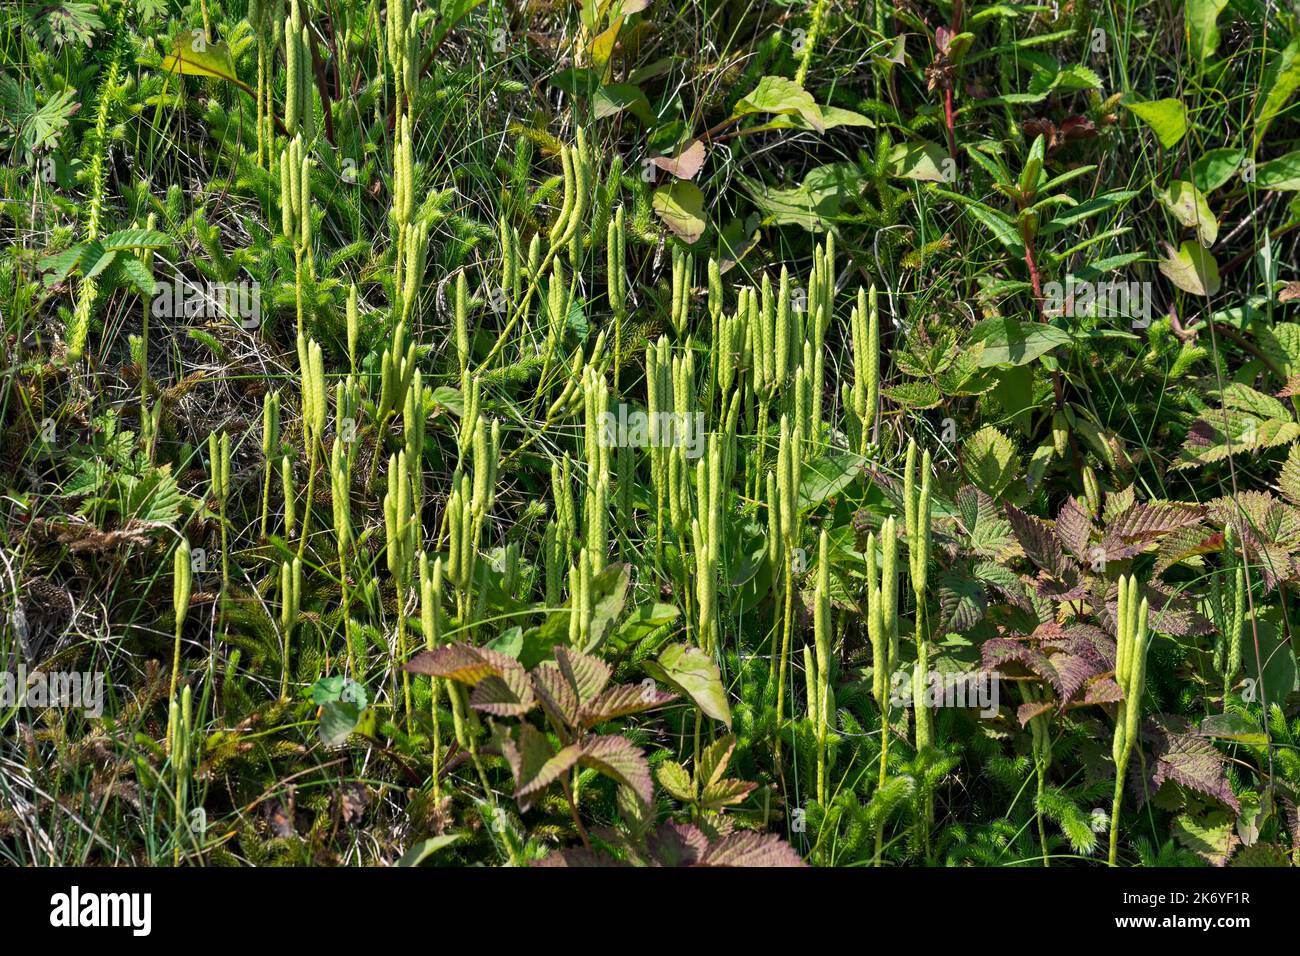 club moss sprouts among the grass Stock Photo